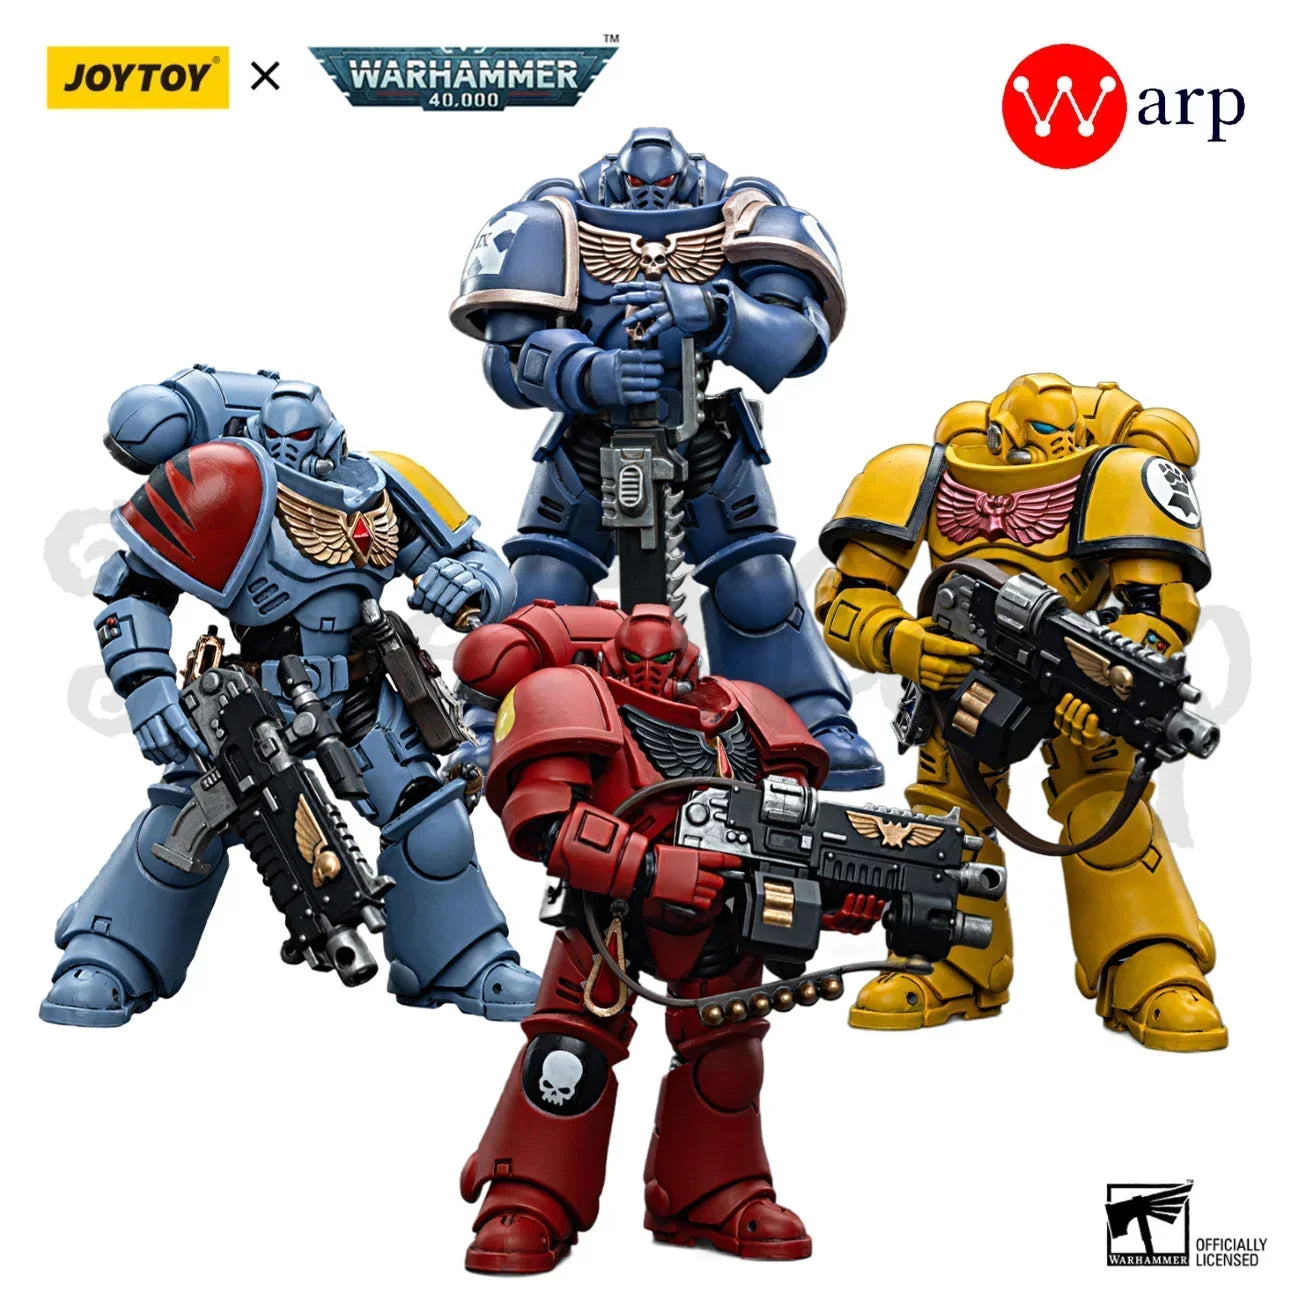 JOYTOY Warhammer 40k 1/18 Action Figure Space Military Miniature Figurine Collectibles